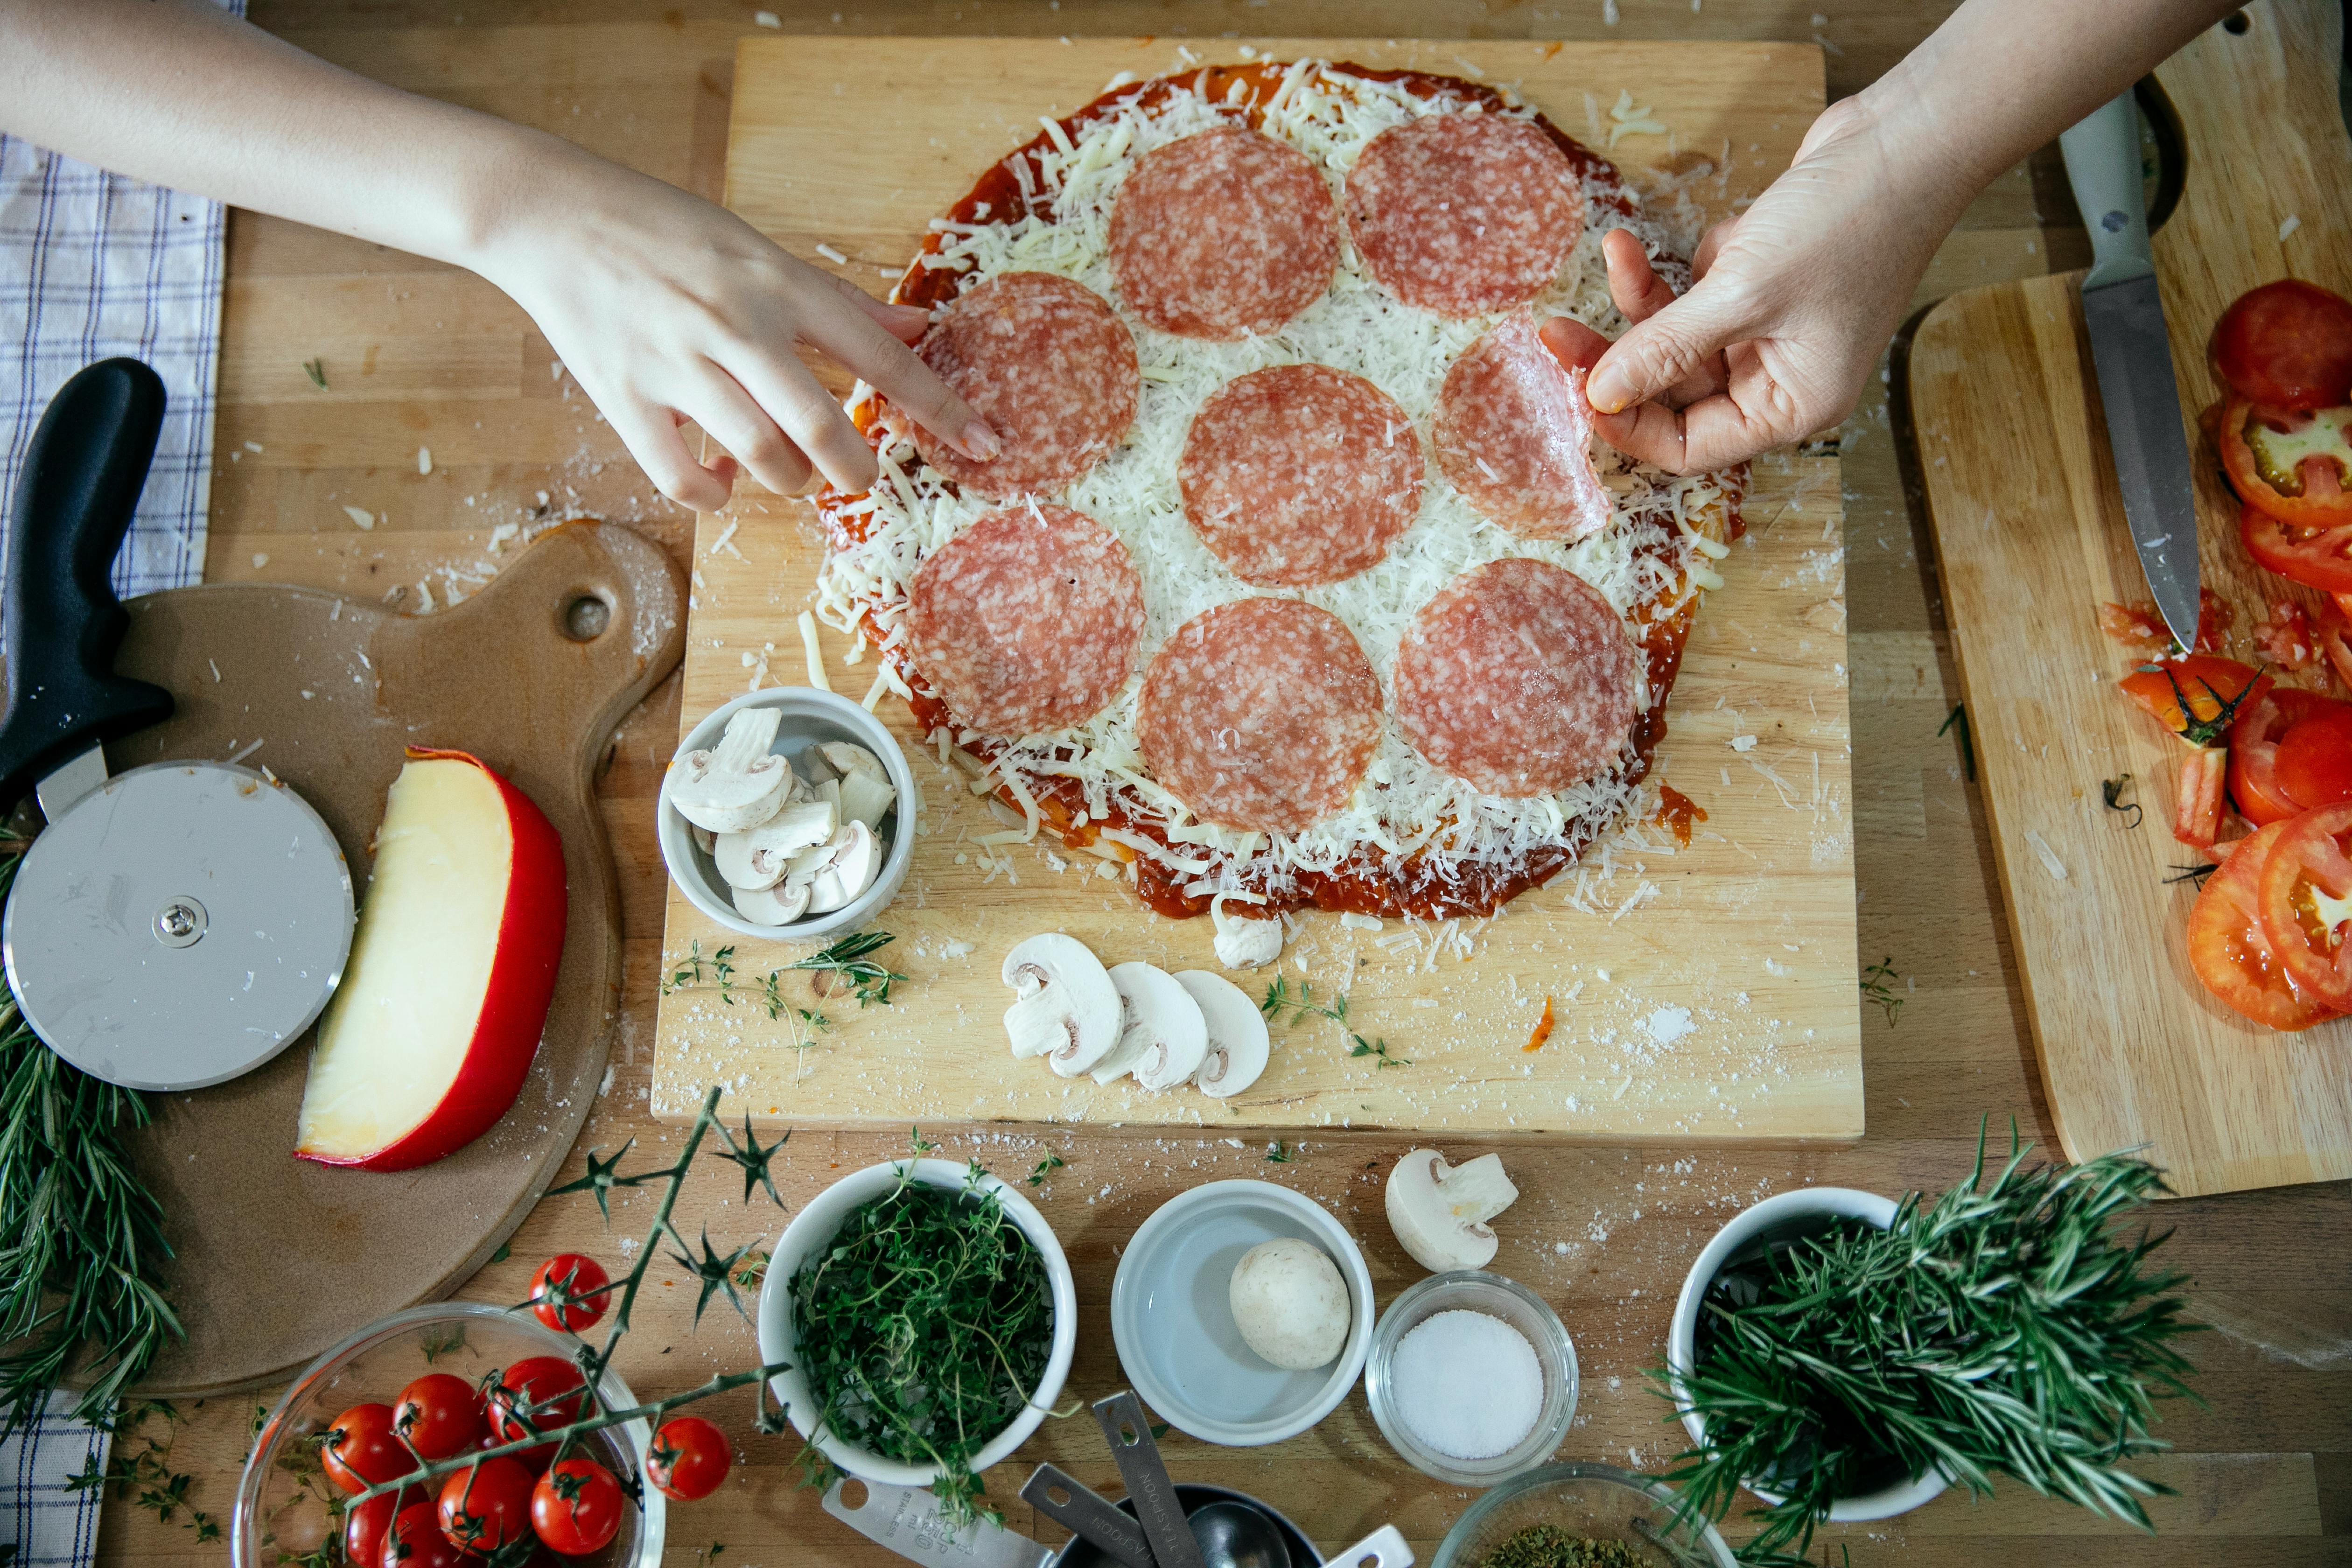 crop people cooking homemade pizza together